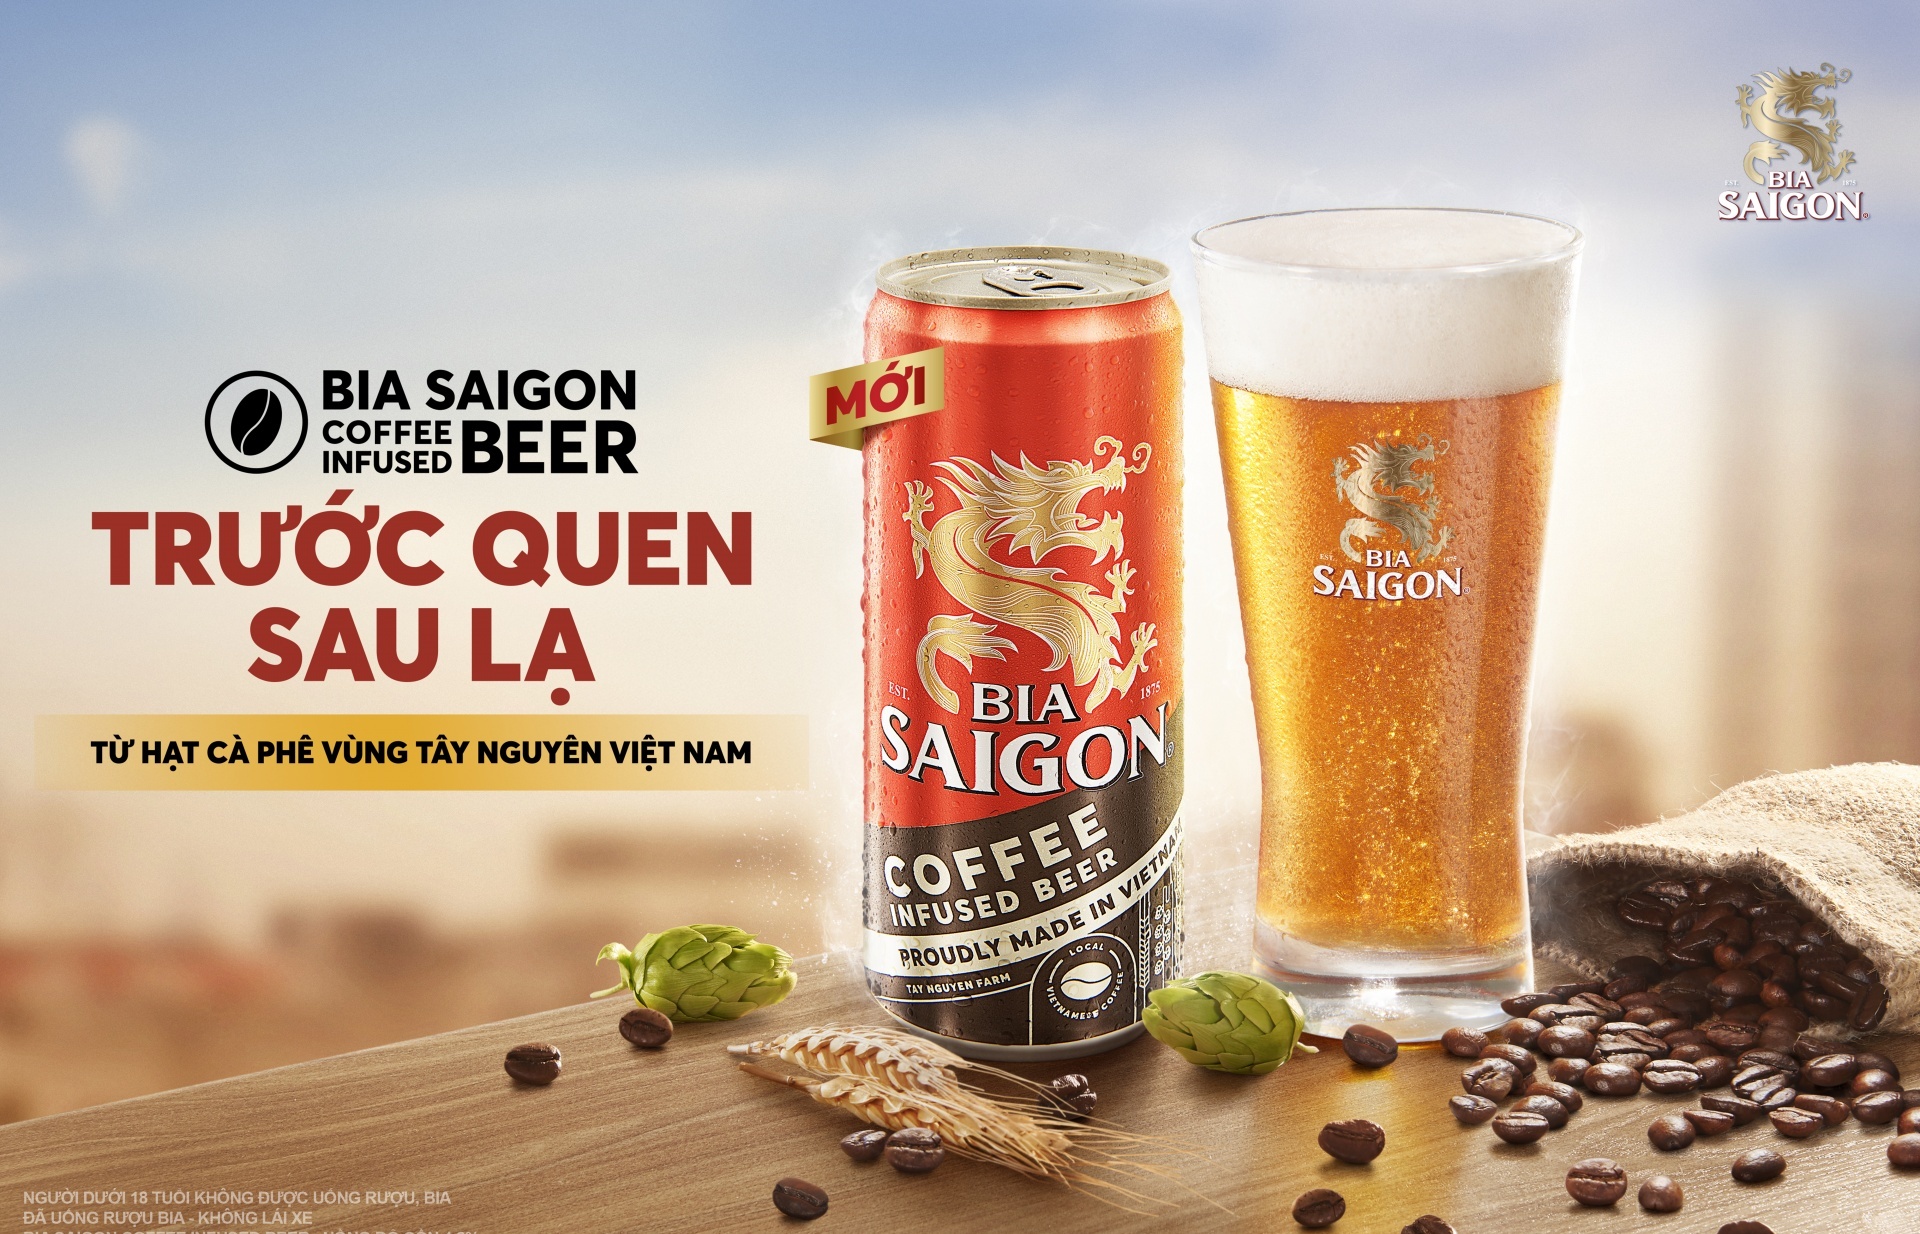 Bia Saigon Coffee-infused Beer offers two great tastes in one